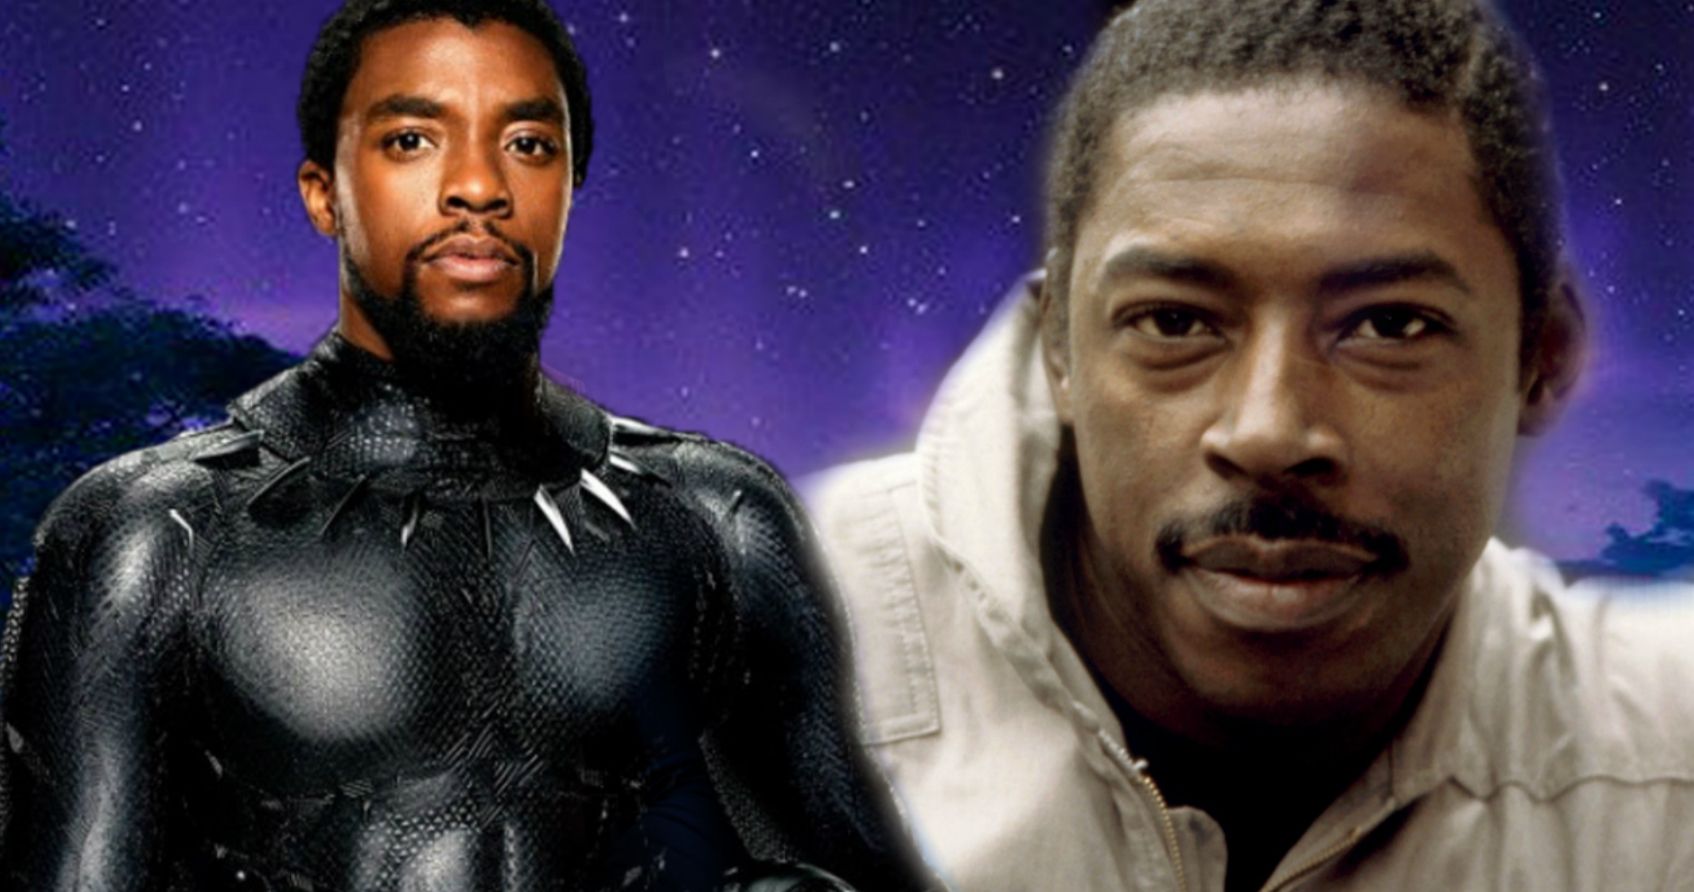 Ghostbusters Star Ernie Hudson Was Denied Black Panther Role, But Keeps Begging to Join the MCU